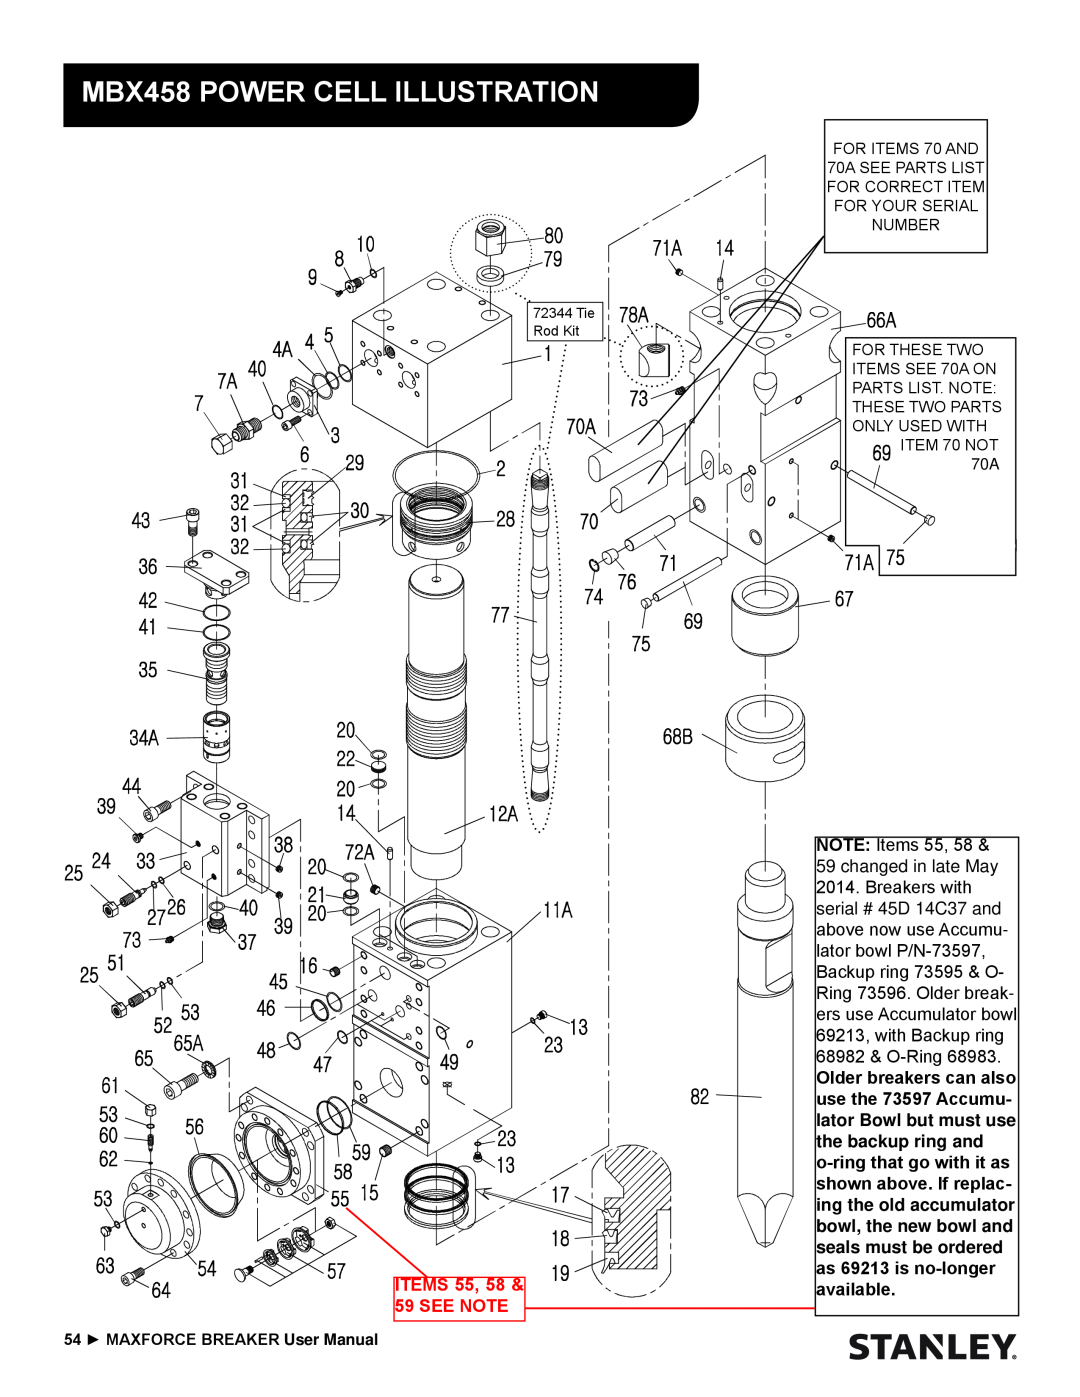 Stanley Black & Decker MBX138 thru MBX608 user manual MBX458 POWER CELL ILLUSTRATION, ITEMS 55, 58 & 59 SEE NOTE 